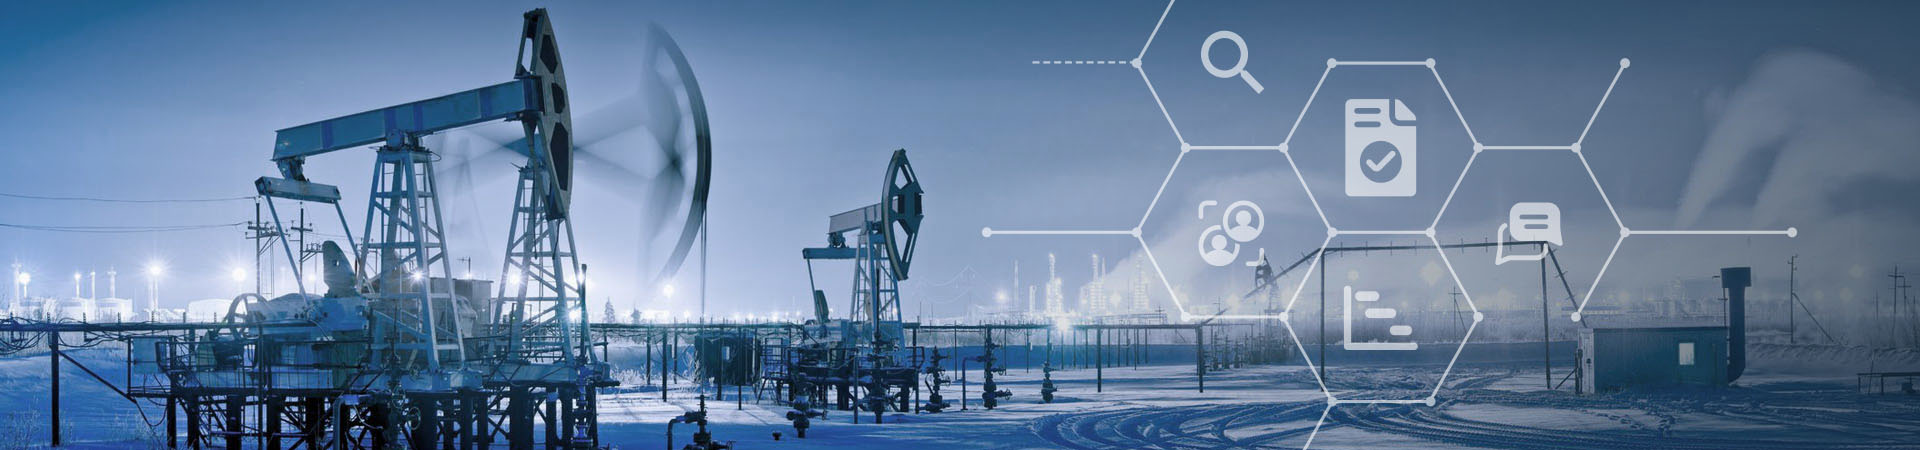 Intranet Development for an International 5,000-Employee Oil and Gas Company